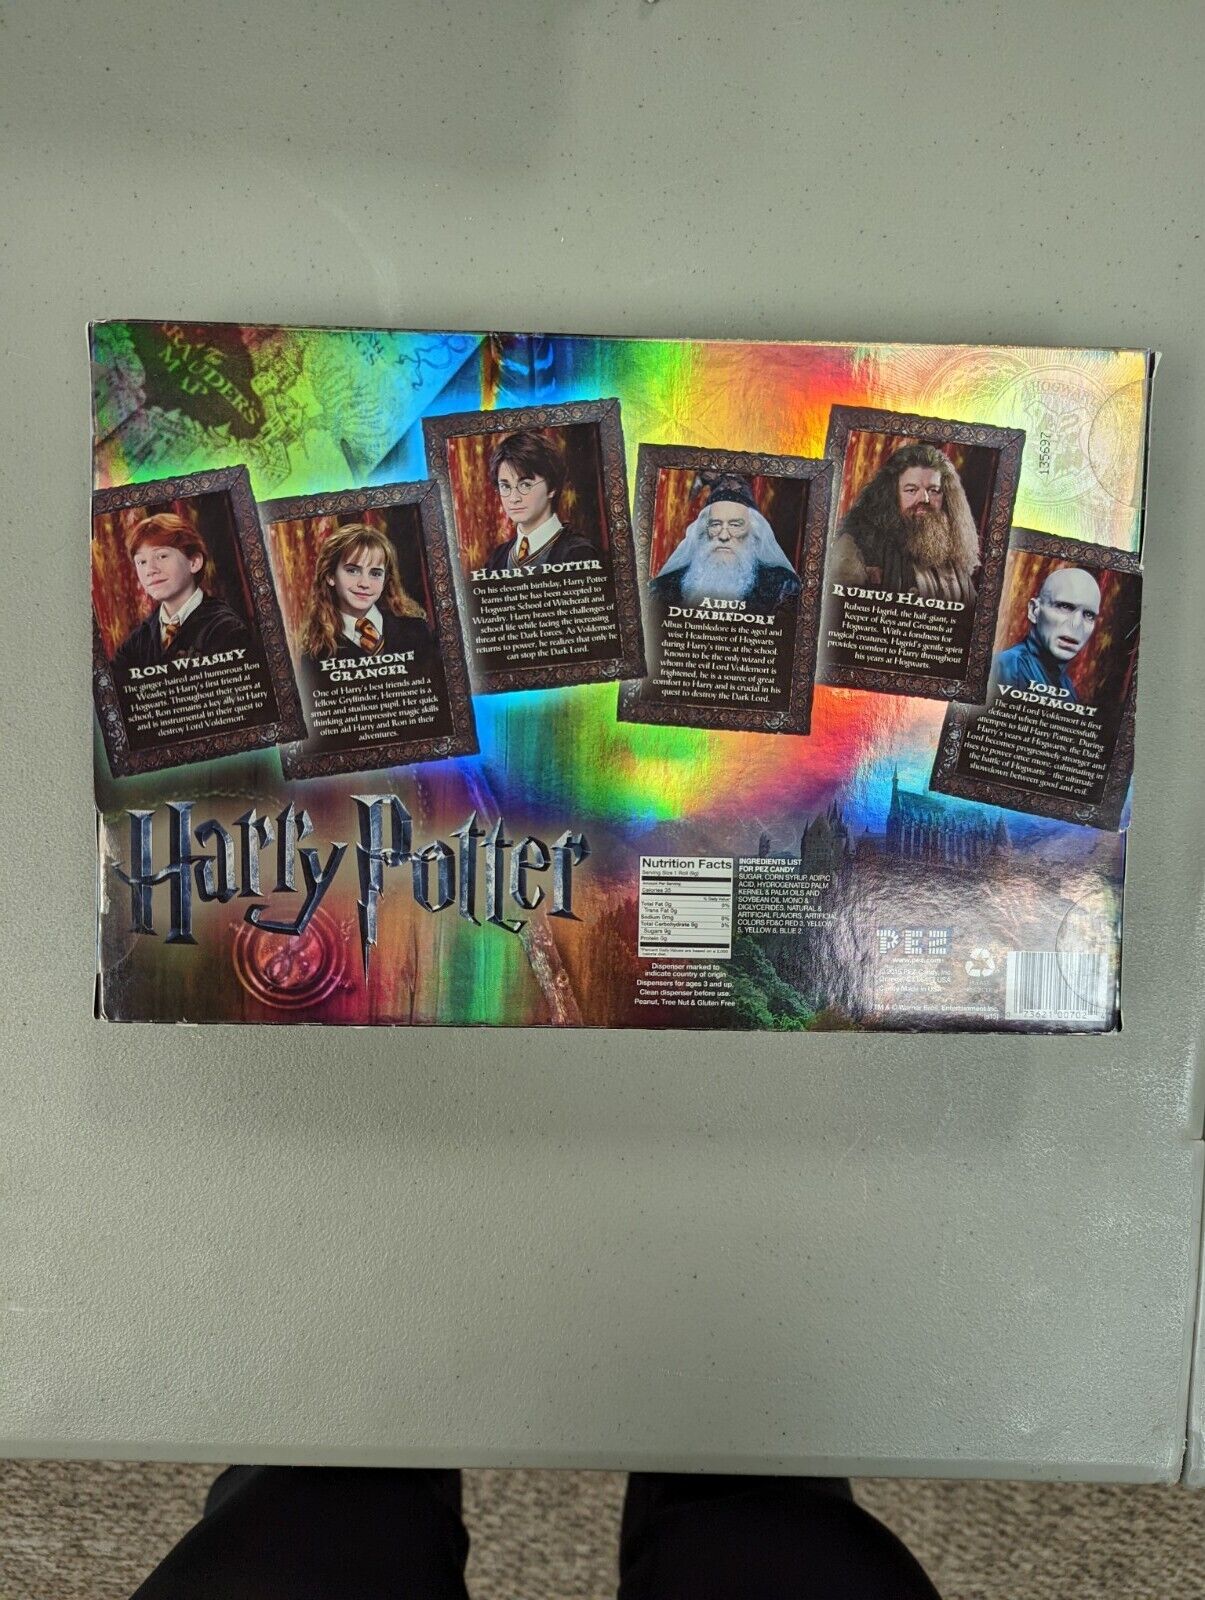 Pez Collector's Series Harry Potter Limited Edition 2015